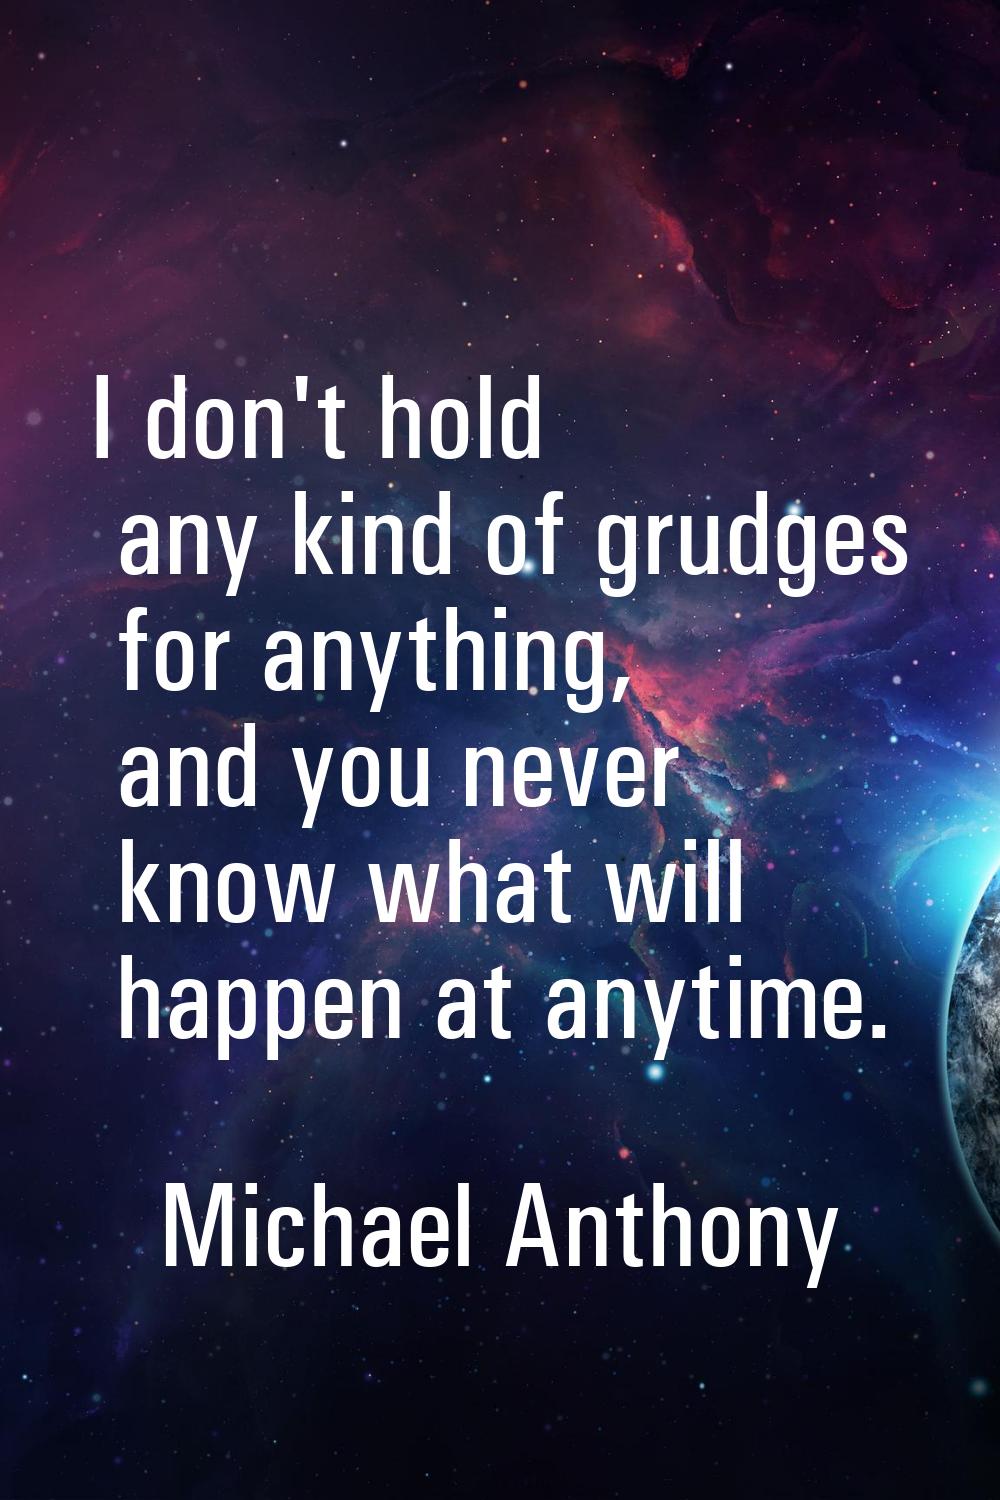 I don't hold any kind of grudges for anything, and you never know what will happen at anytime.